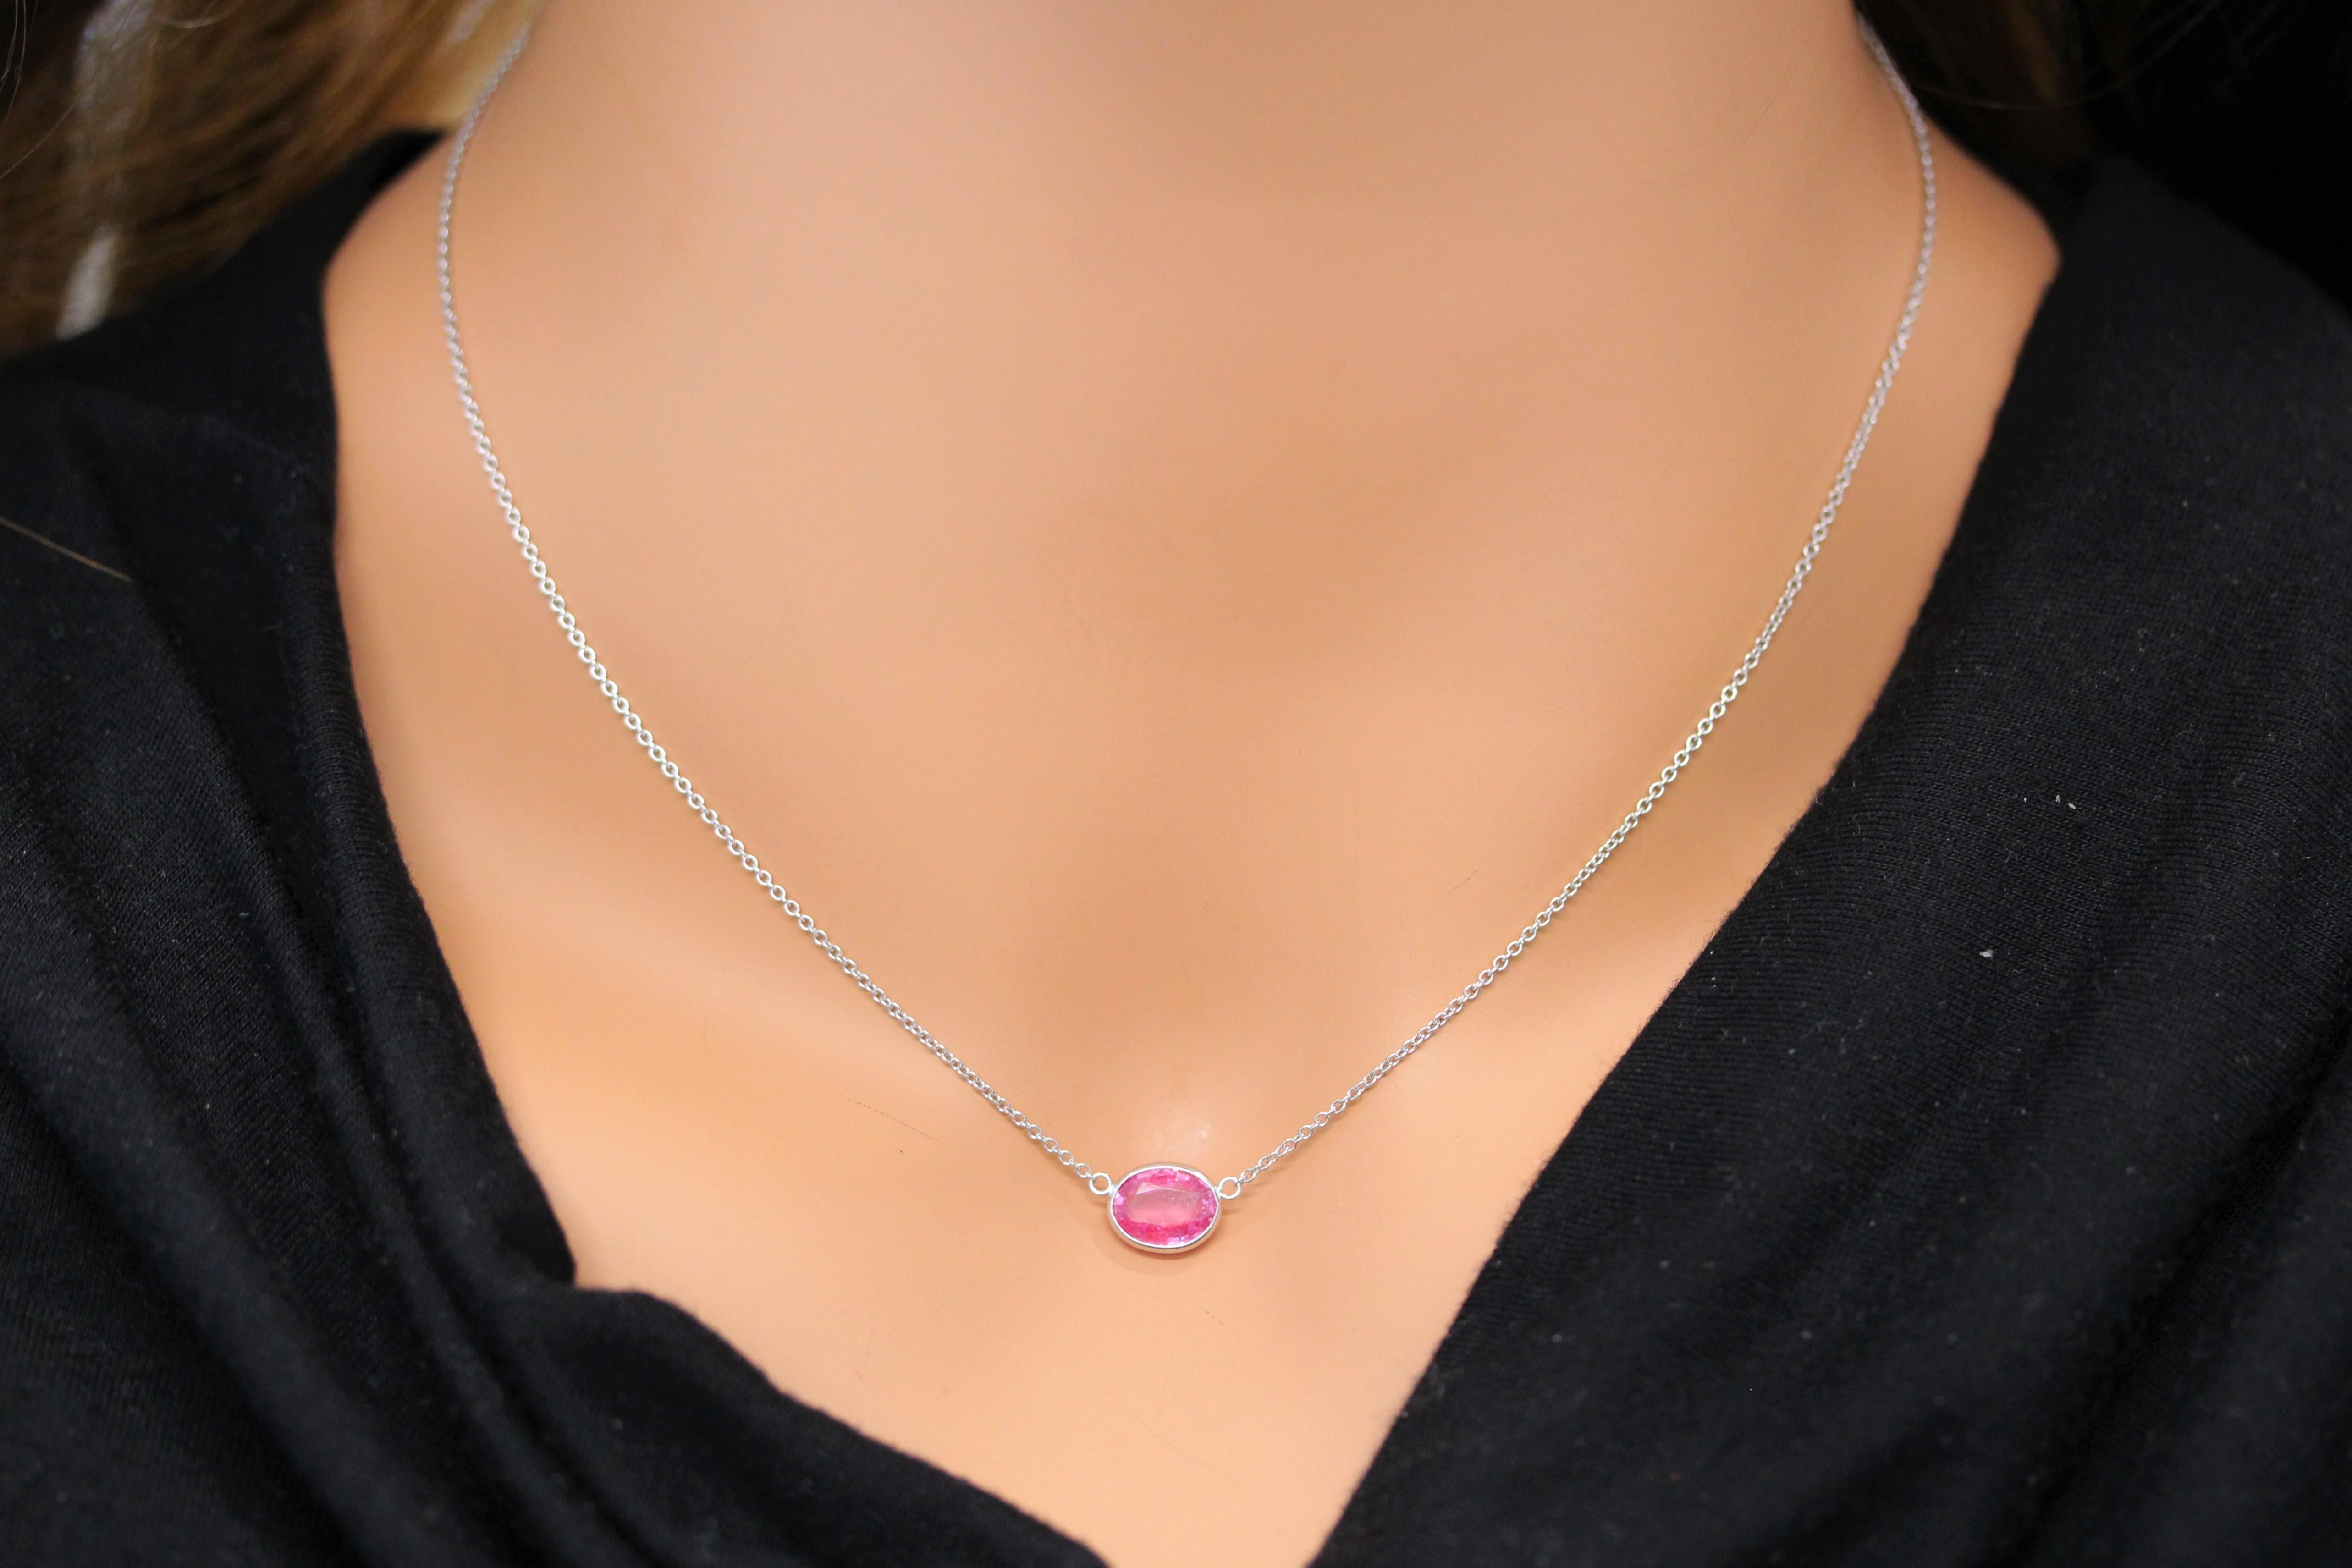 Contemporary 2.15 Carat Oval Padparadschah Pink Fashion Necklaces In 14k White Gold For Sale